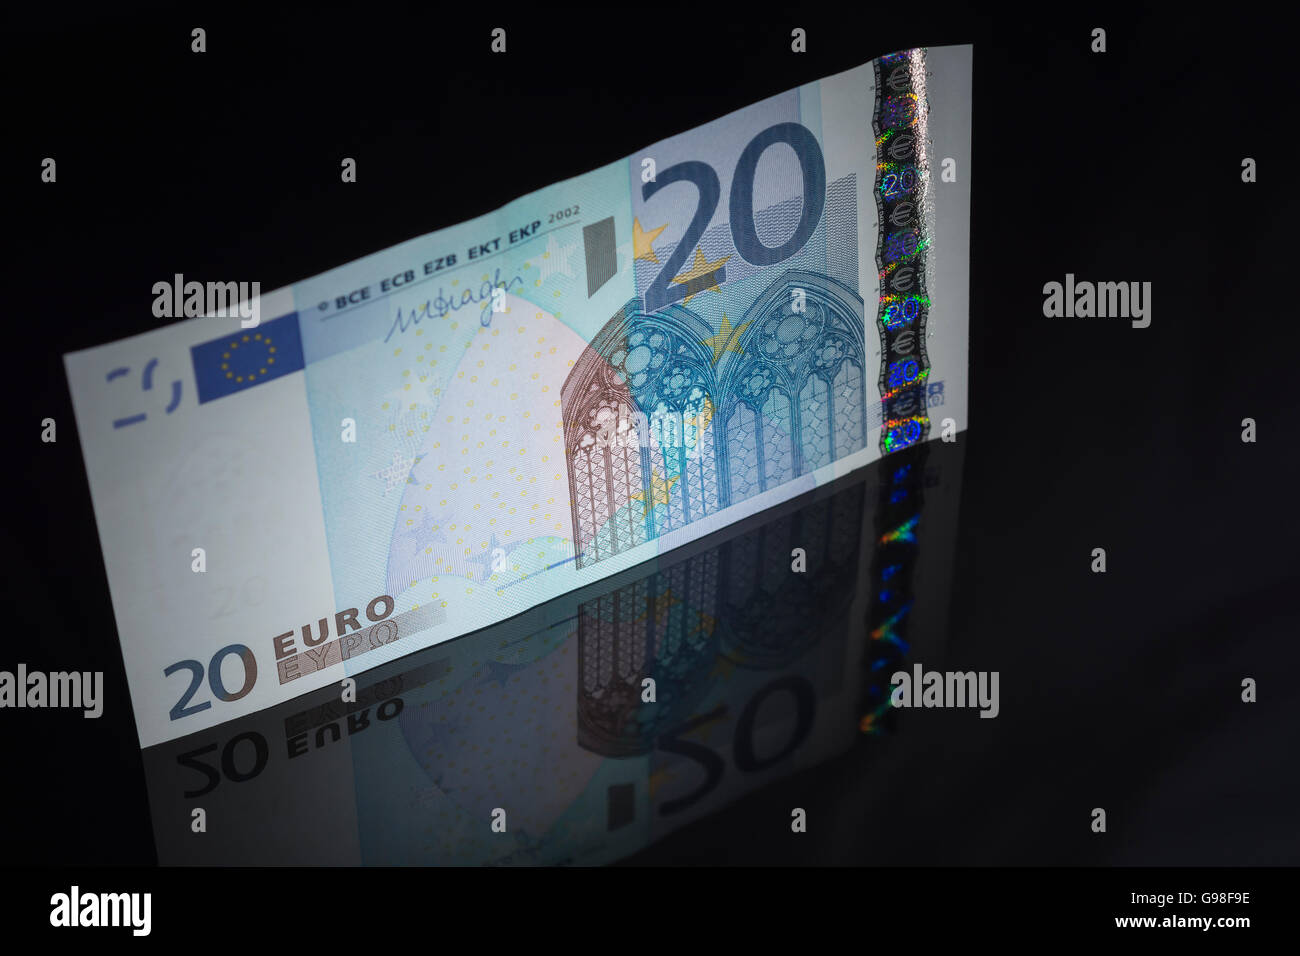 Concept of Euro zone, single market represented by a 20 Euro banknote. Stock Photo